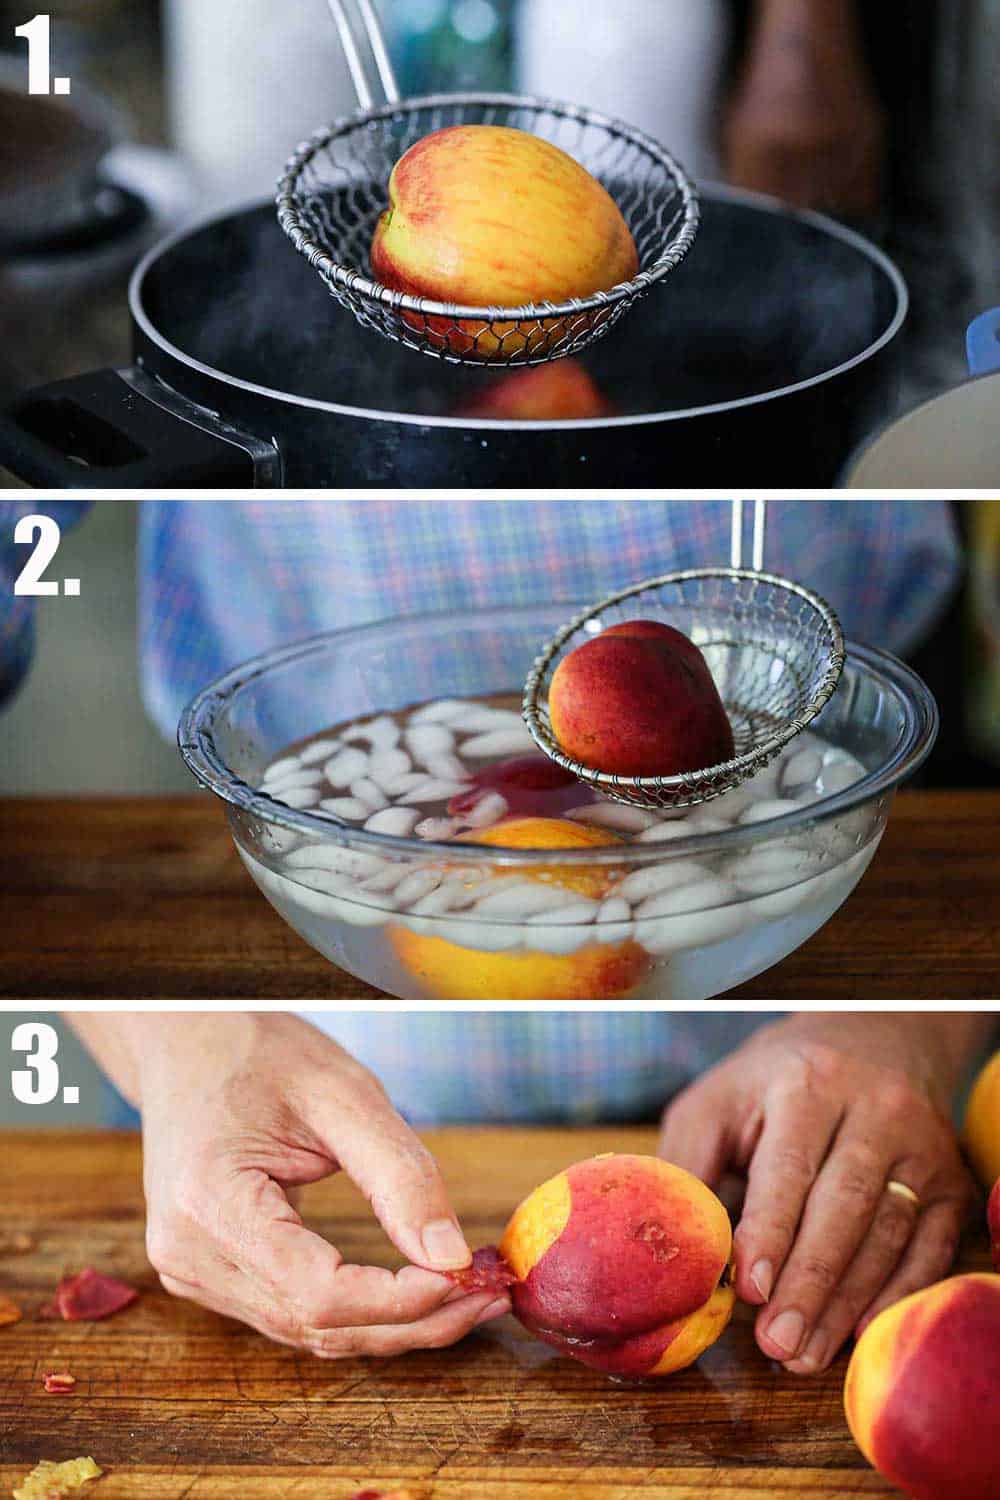 A kitchen spider holding up a peach over a pot of boiling water and then that peach being dropped into an ice bath and then a person peeling the peach.